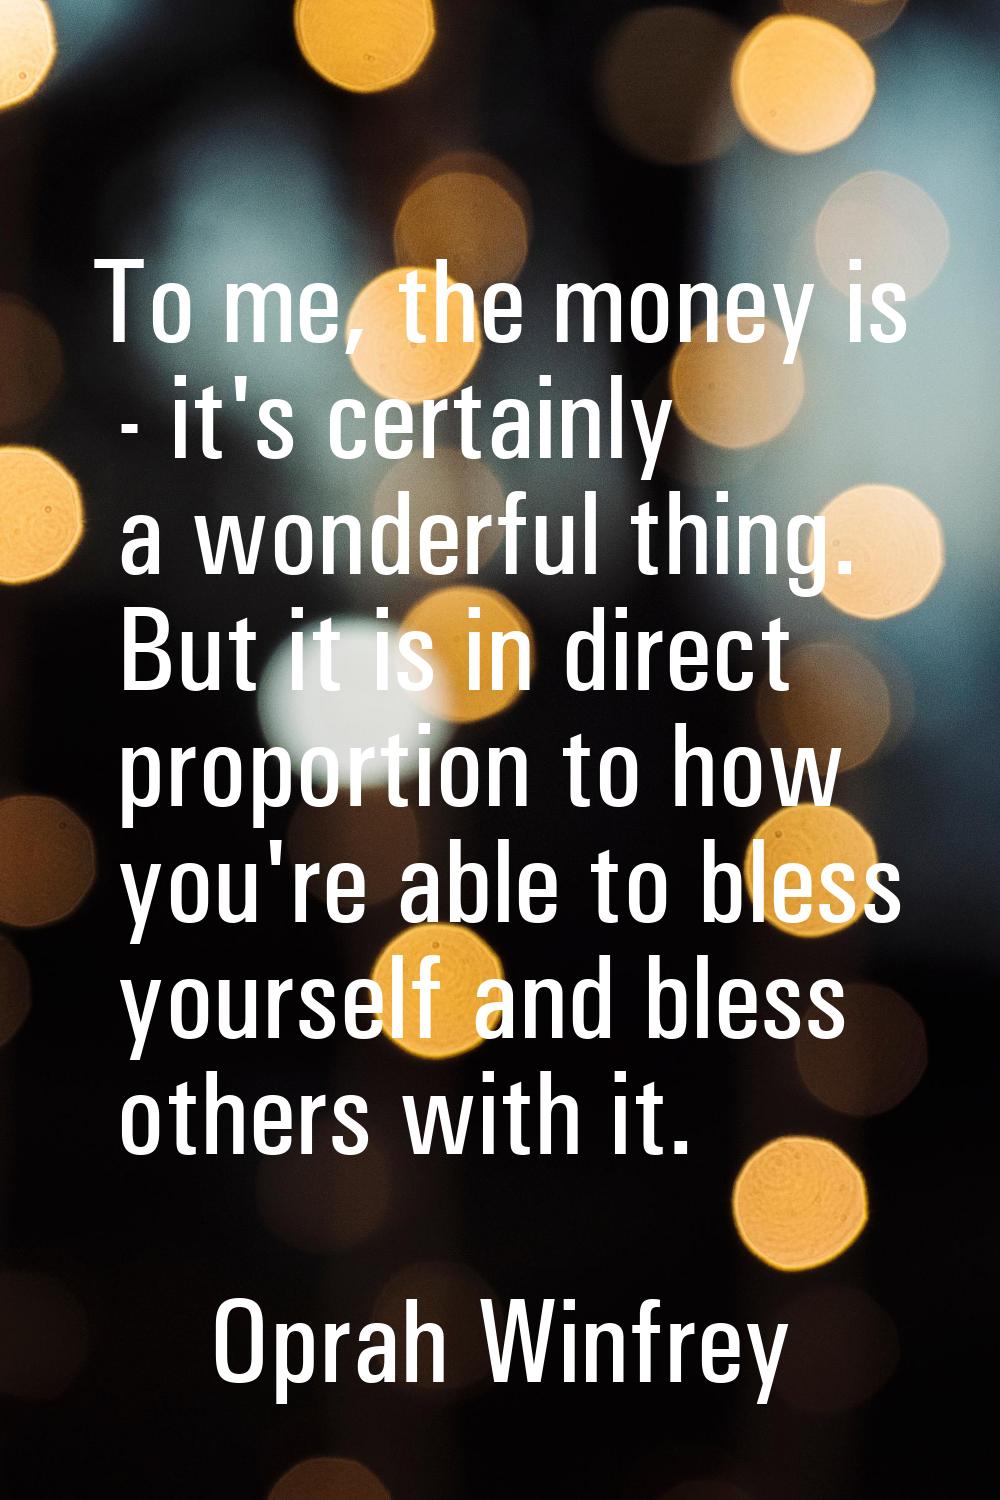 To me, the money is - it's certainly a wonderful thing. But it is in direct proportion to how you'r